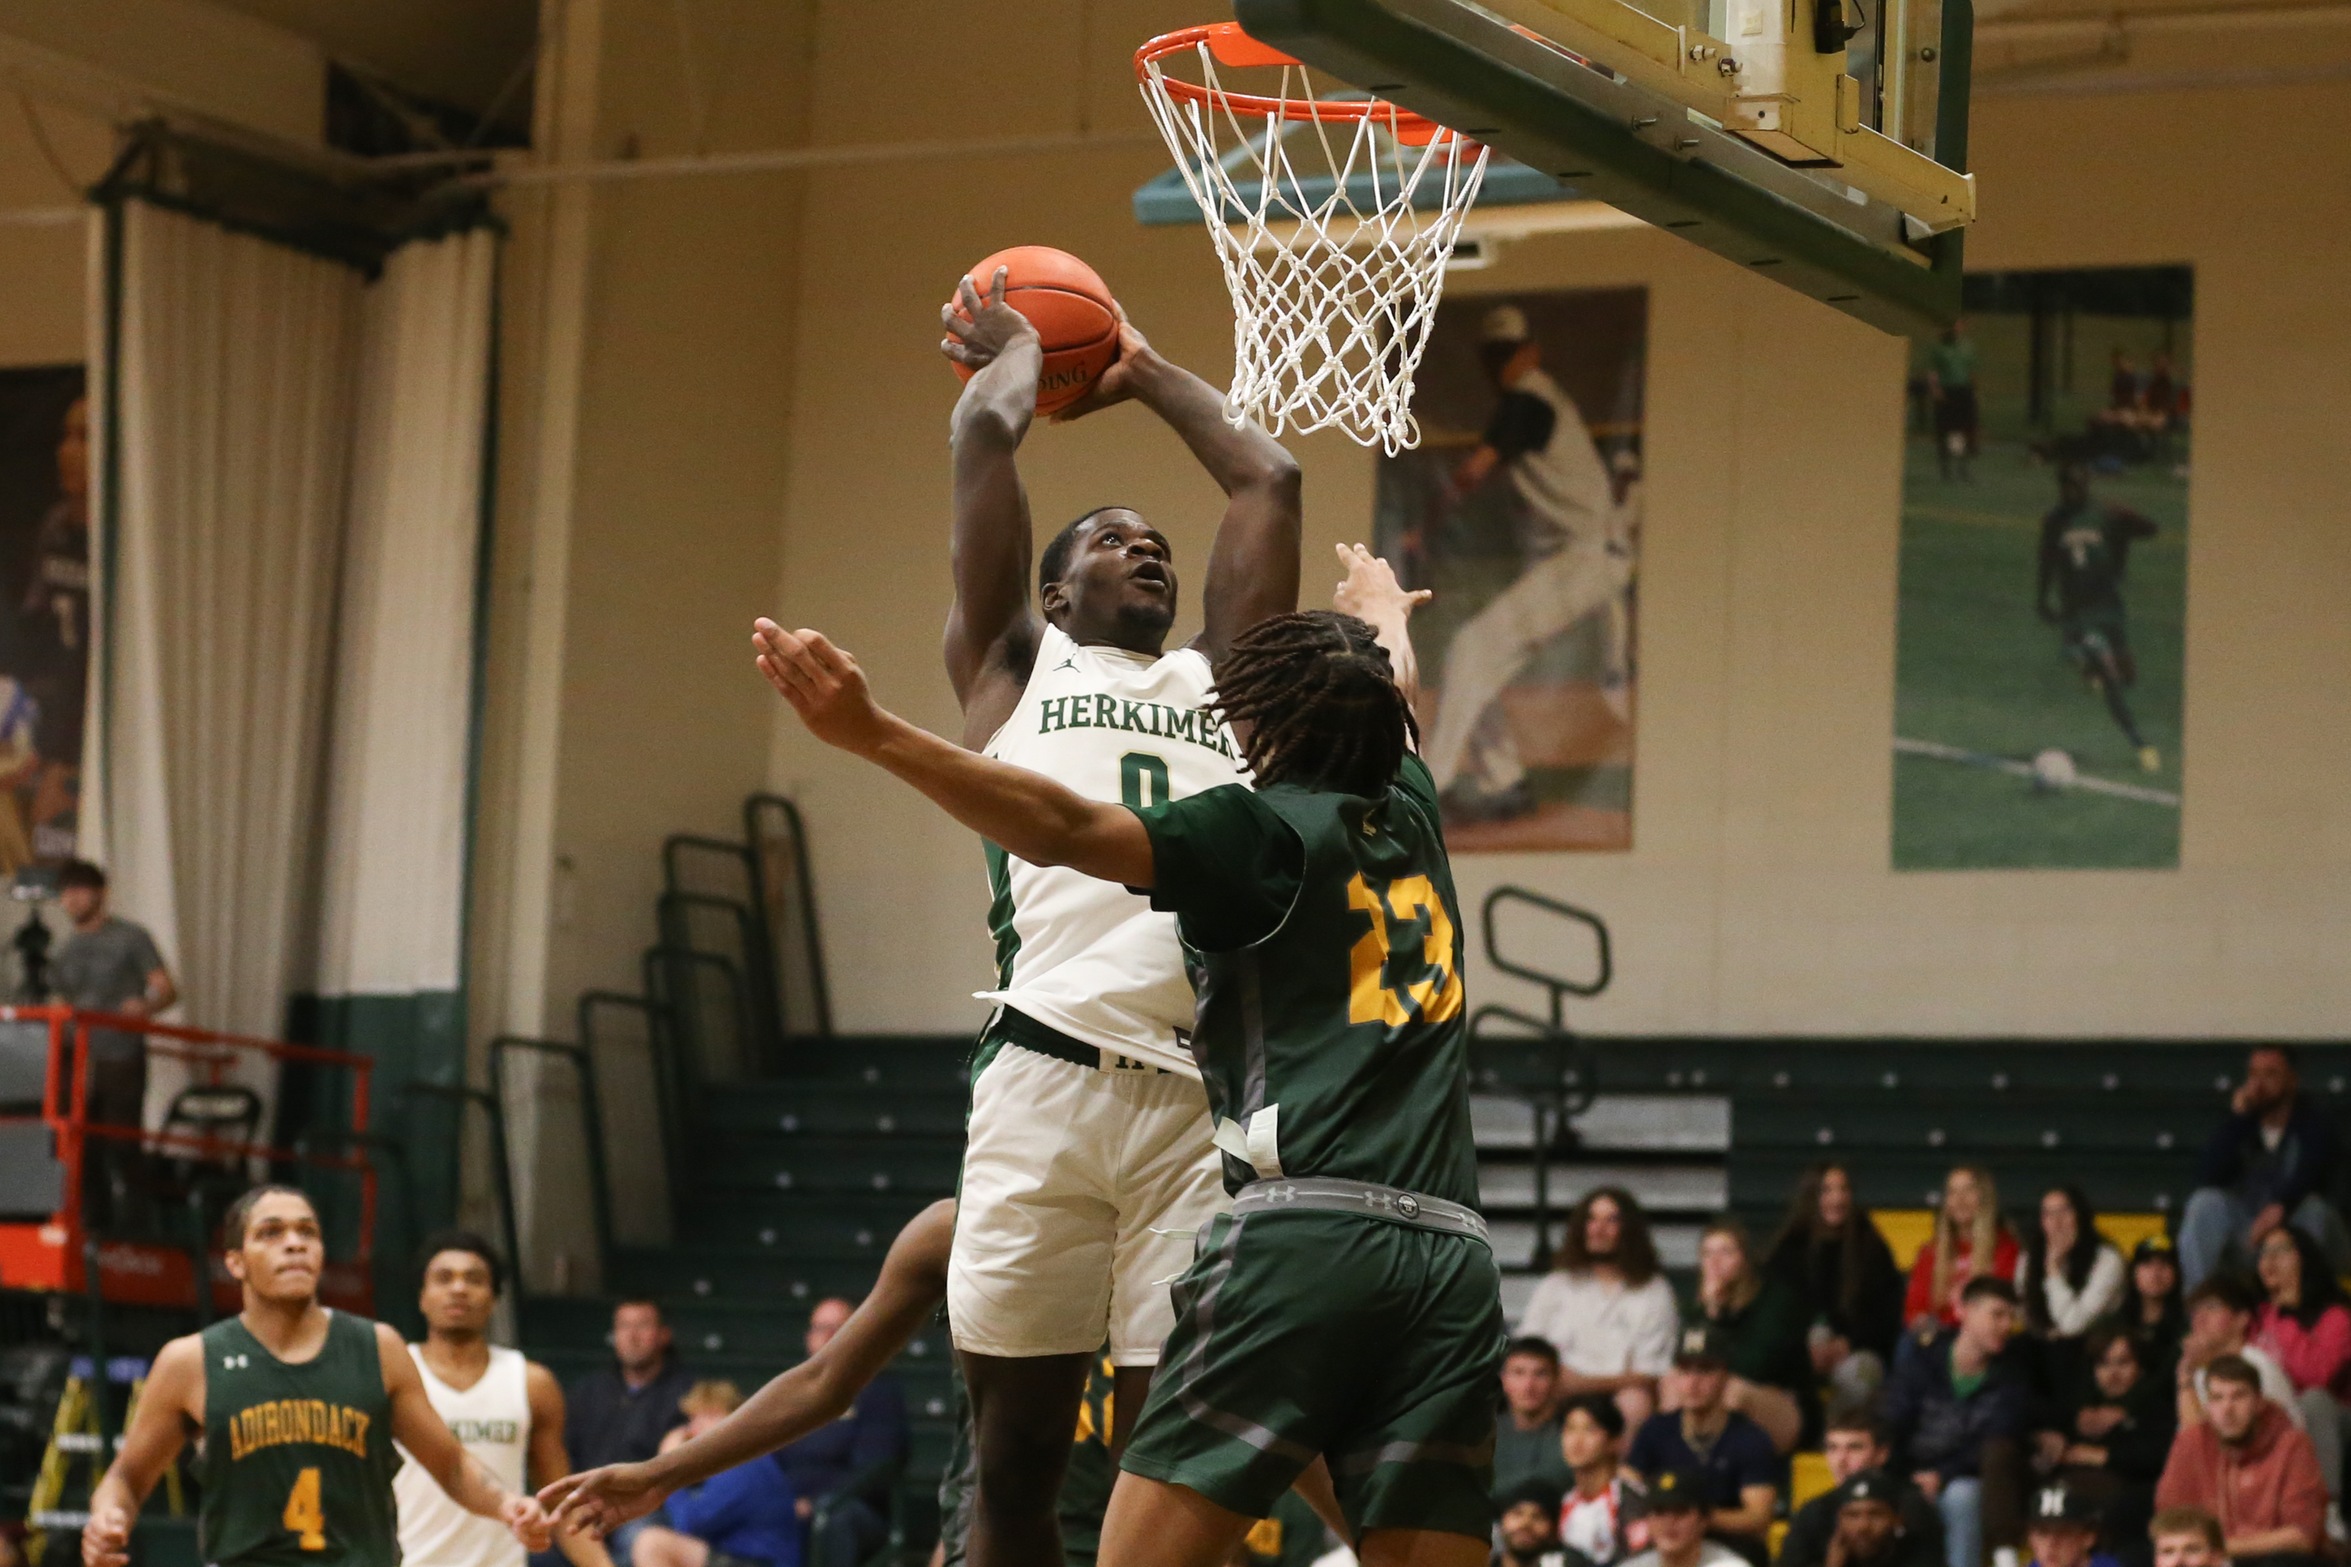 Herkimer Men's Basketball Improves to 3-0 with Win Over Columbia-Greene